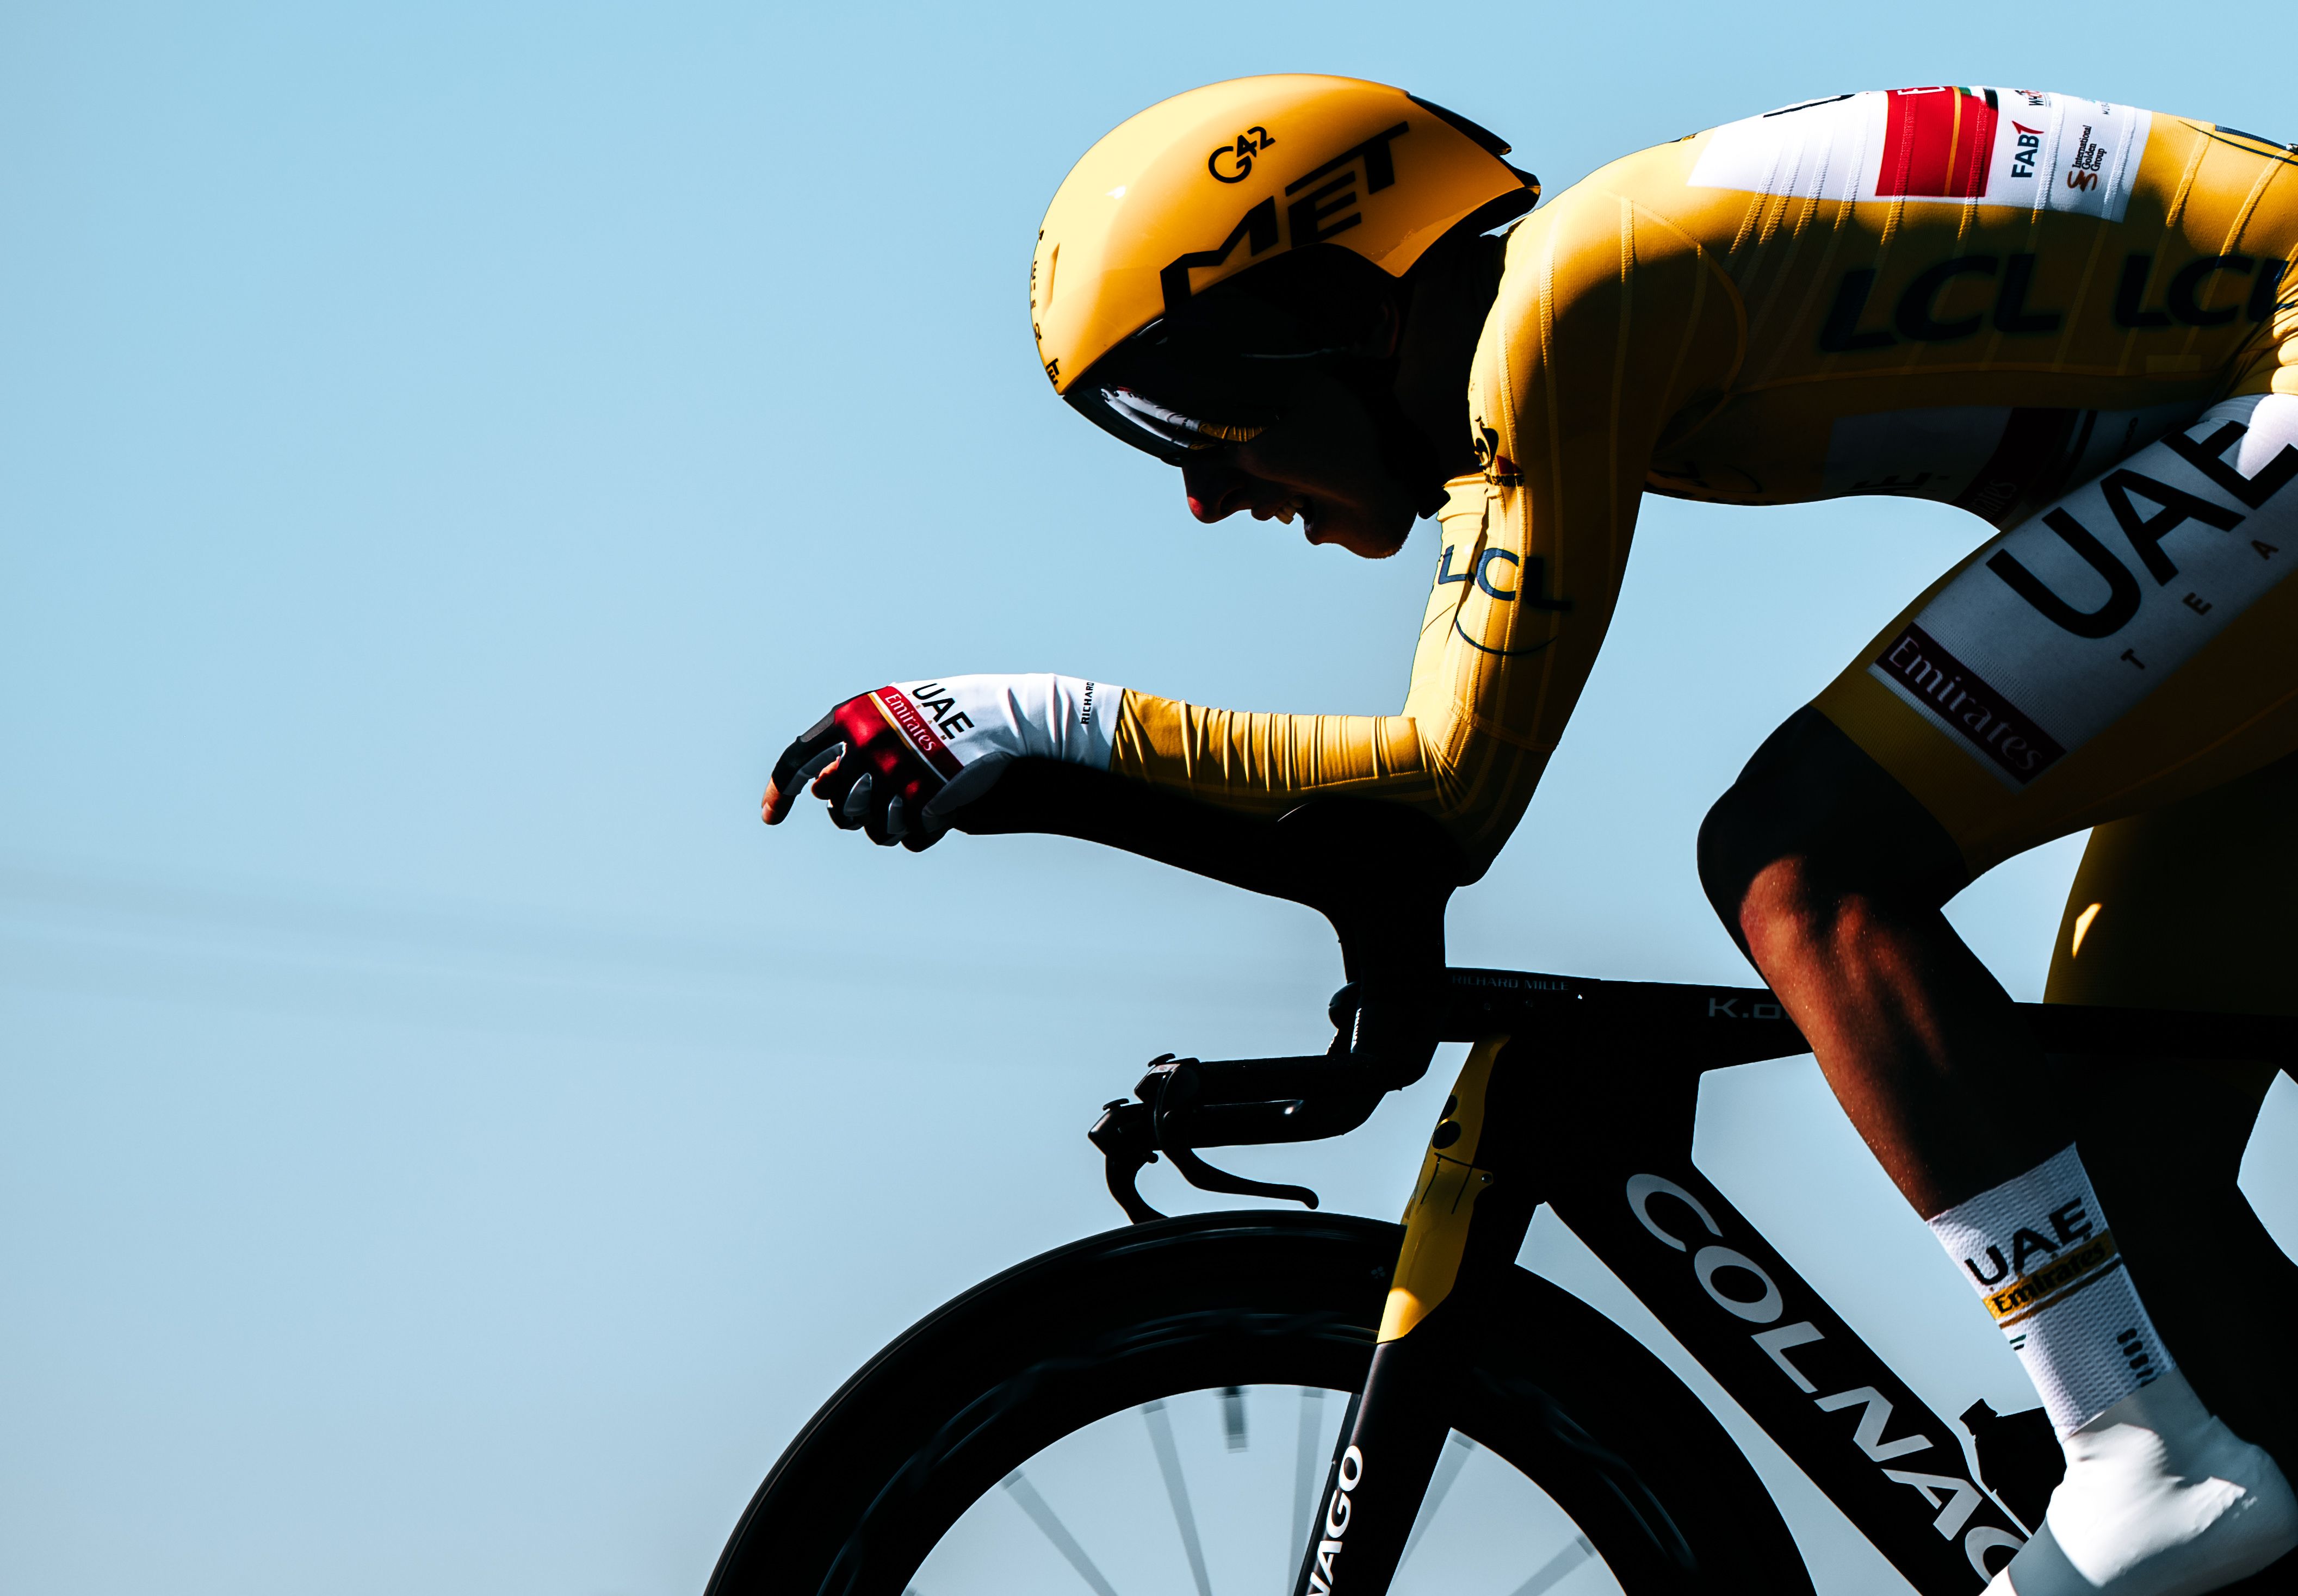 Pogačar in the yellow jersey during the 2021 Tour de France Stage 20 time trial.